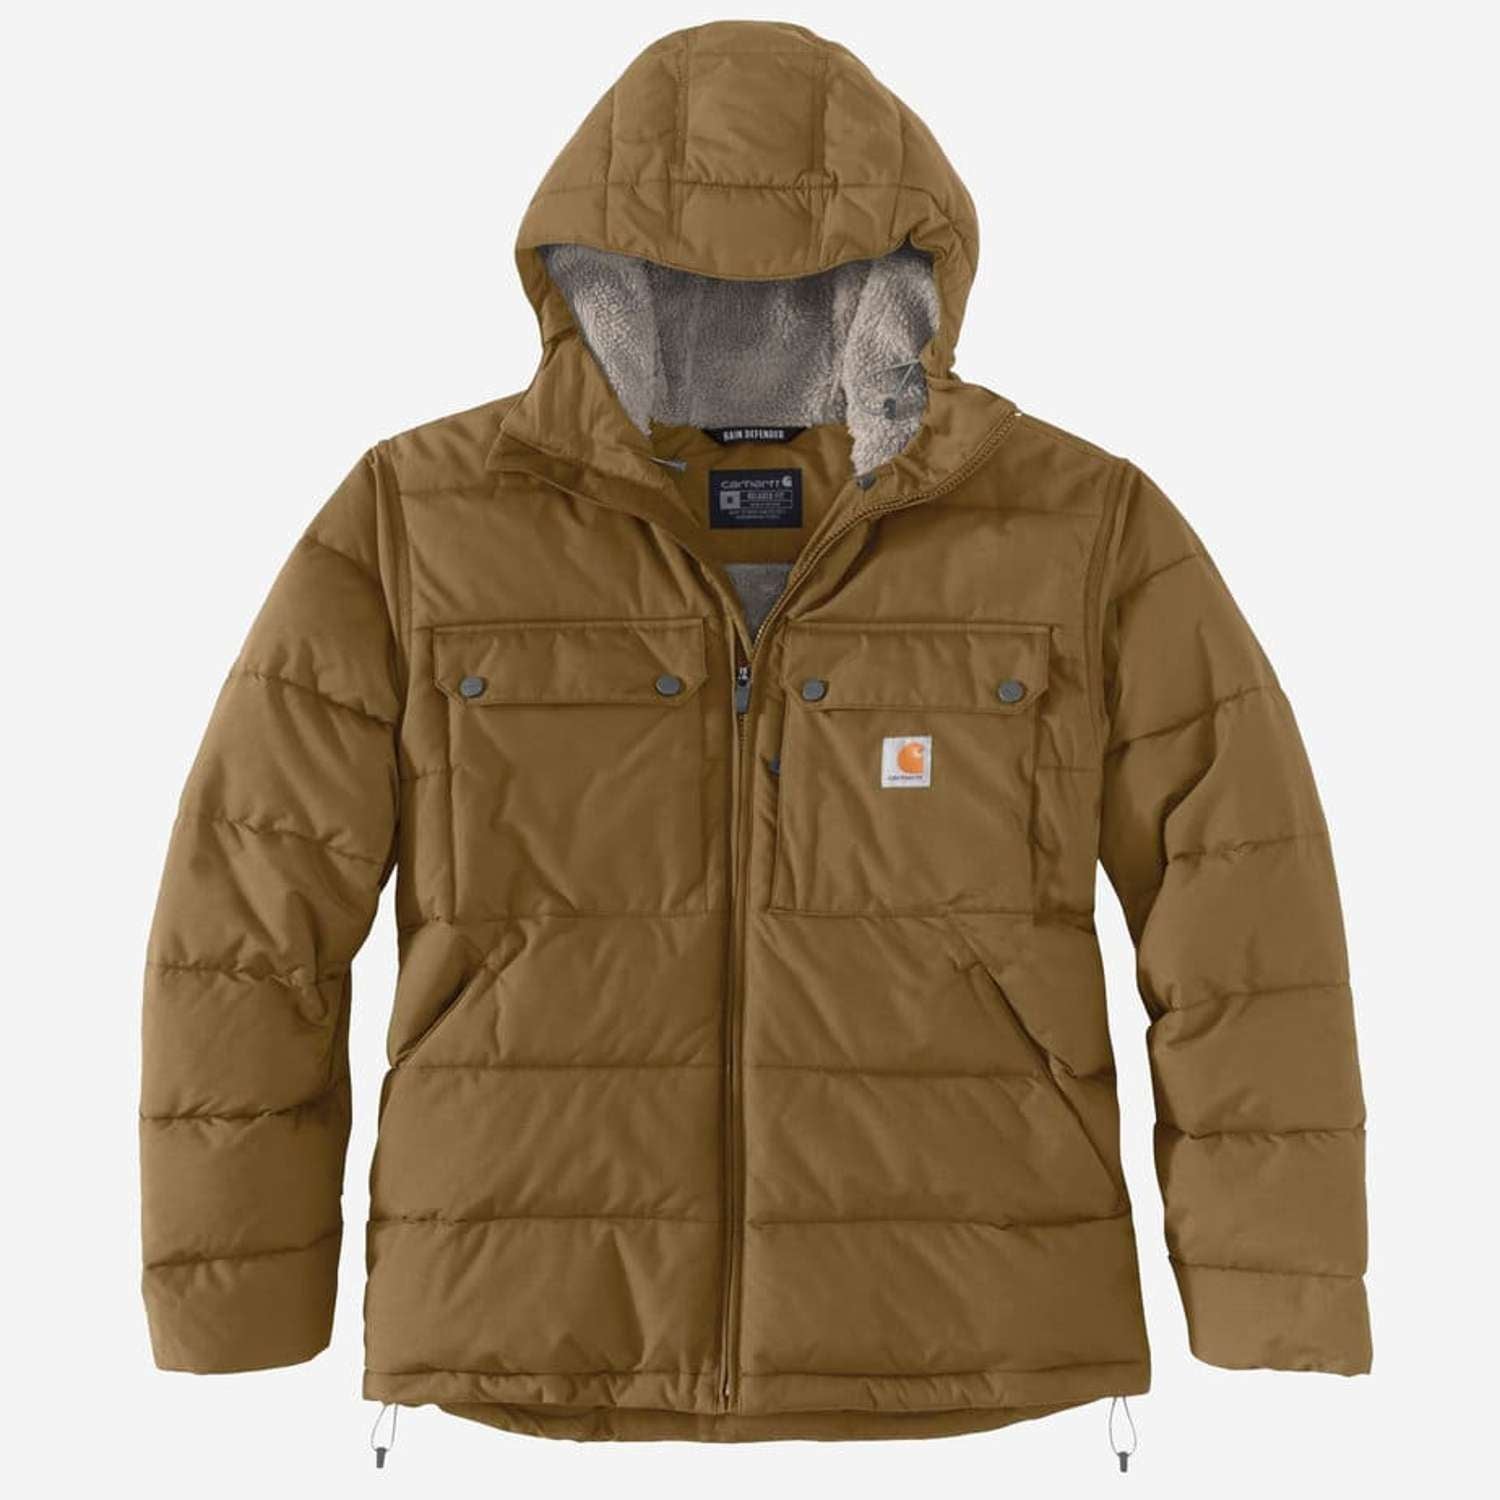 Se CARHARTT Loose Fit Midweight Insulated Jacket OAK BROWN - M hos Toolster.dk